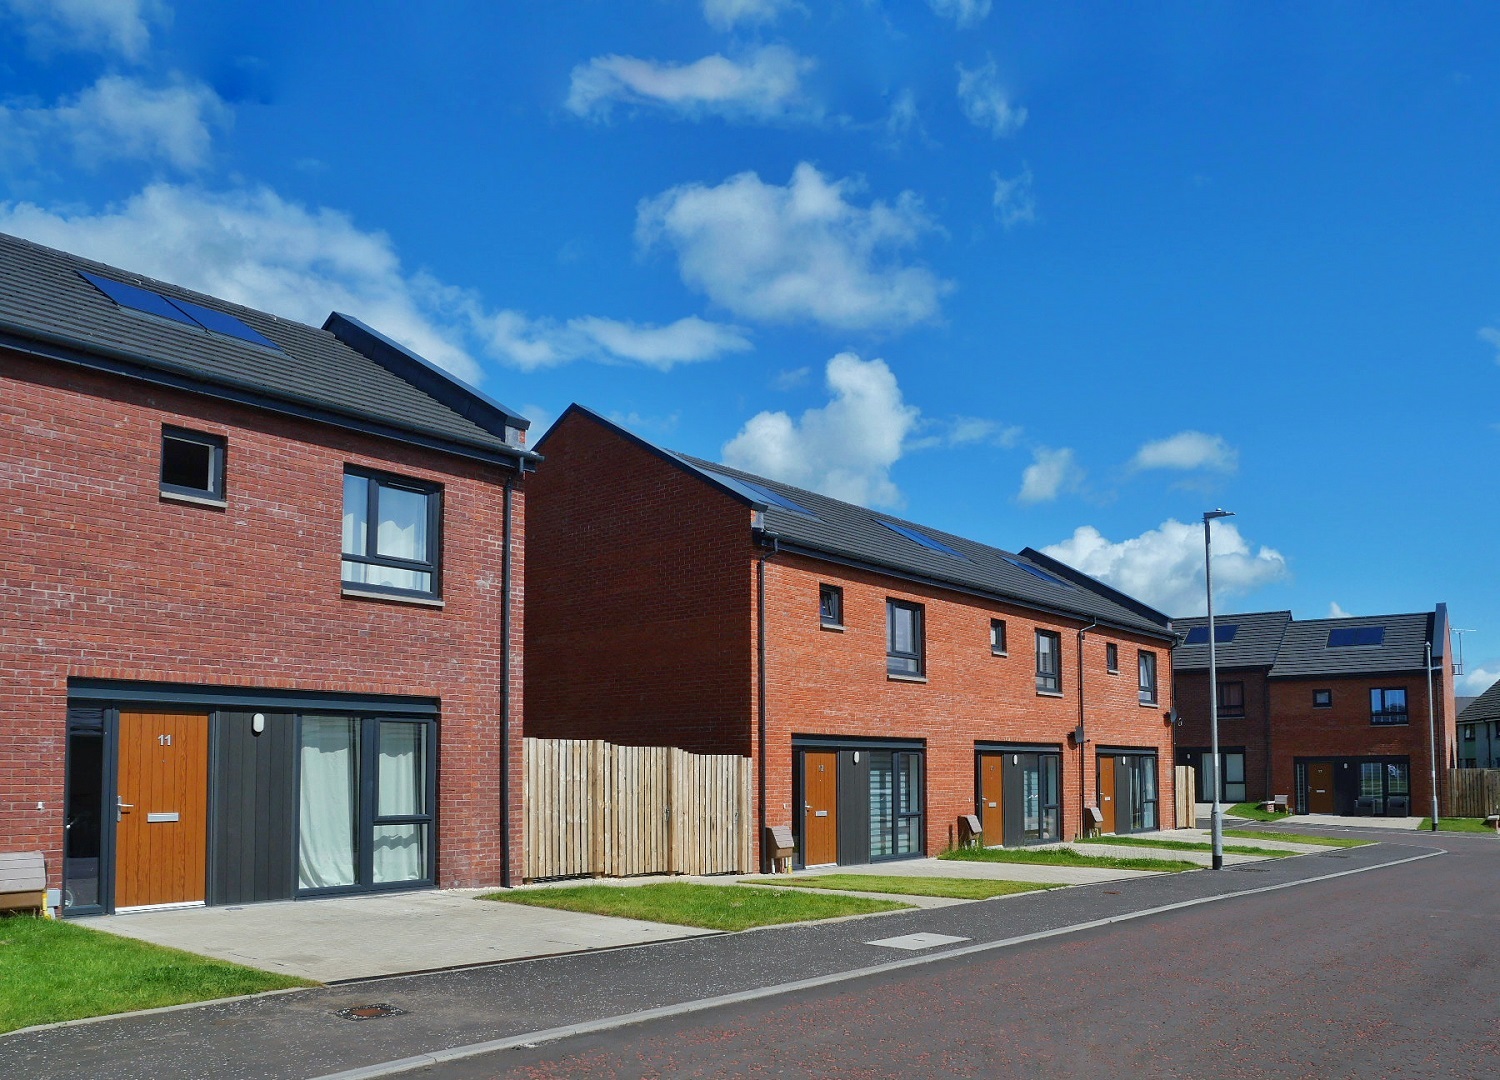 GRAHAM delivers 79 new homes for North Ayrshire community image